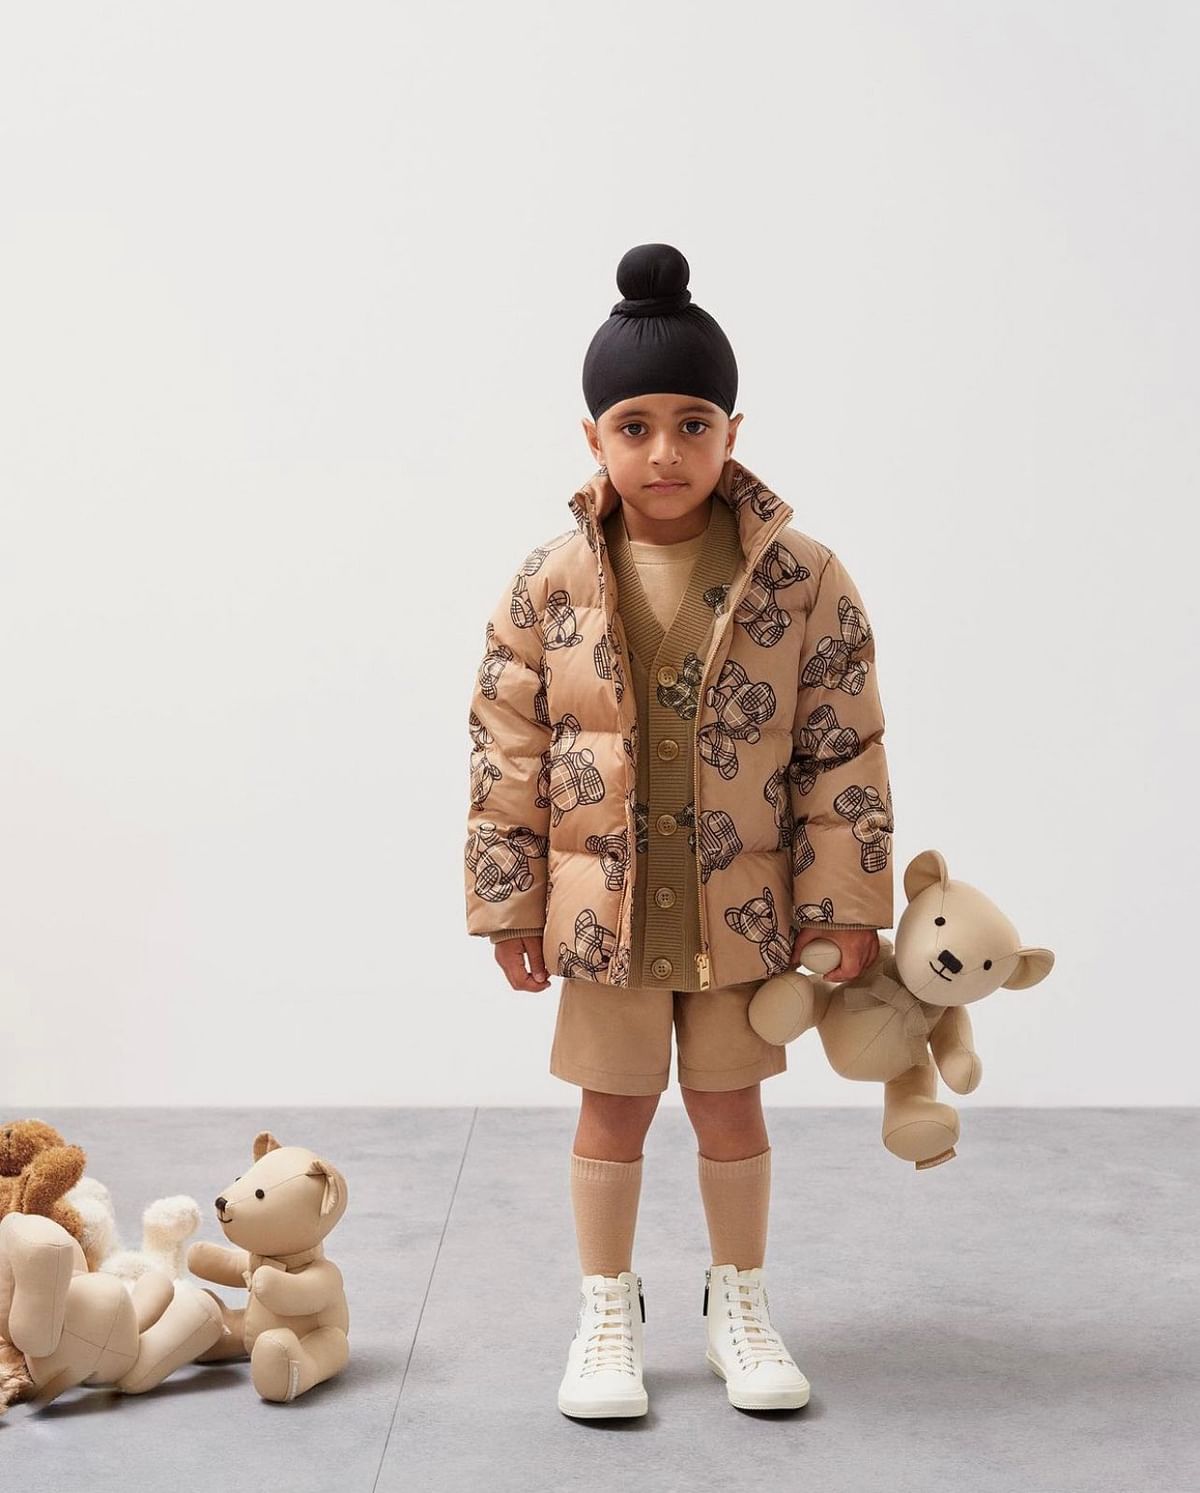 Sahib Singh is a 4-year-old Sikh who recently featured in the luxury brand's 'back to school' collection.